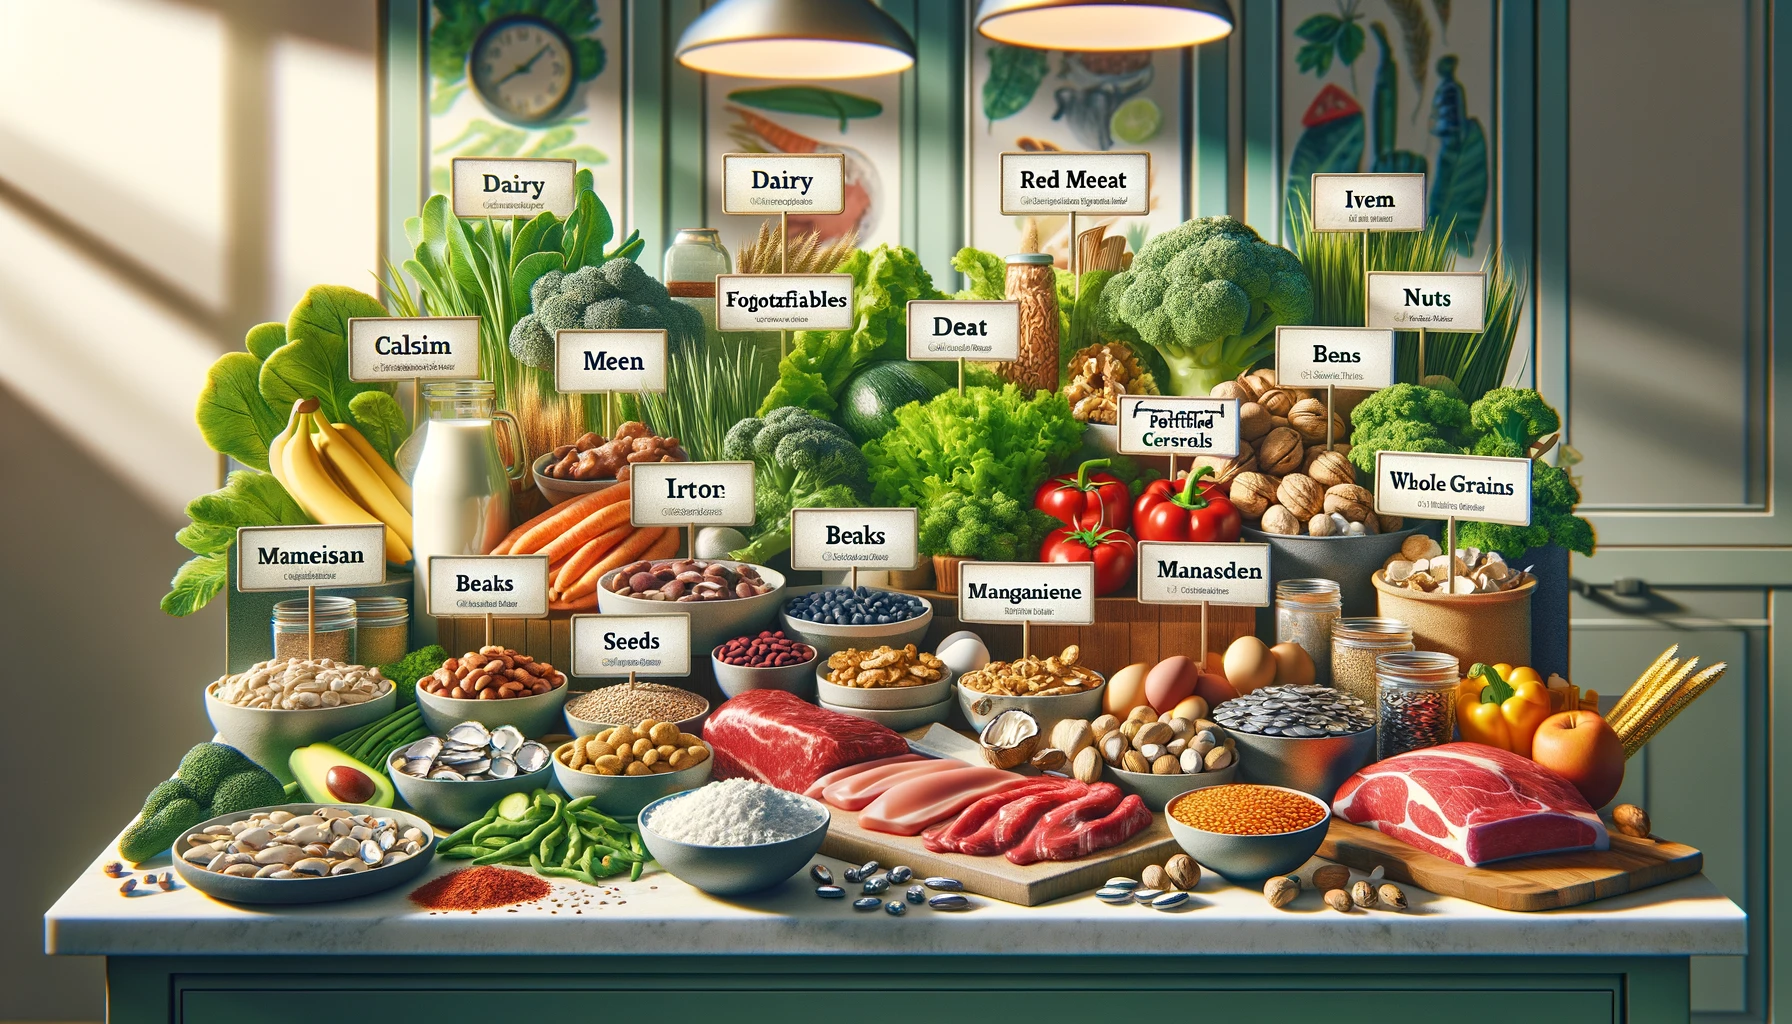 An educational illustration showcasing a variety of nutrient-rich foods, each tagged with its corresponding mineral—calcium in dairy and greens, iron in meats and beans, magnesium in nuts and seeds, manganese in legumes and vegetables, and zinc in oysters and beef—set against a vibrant kitchen background.